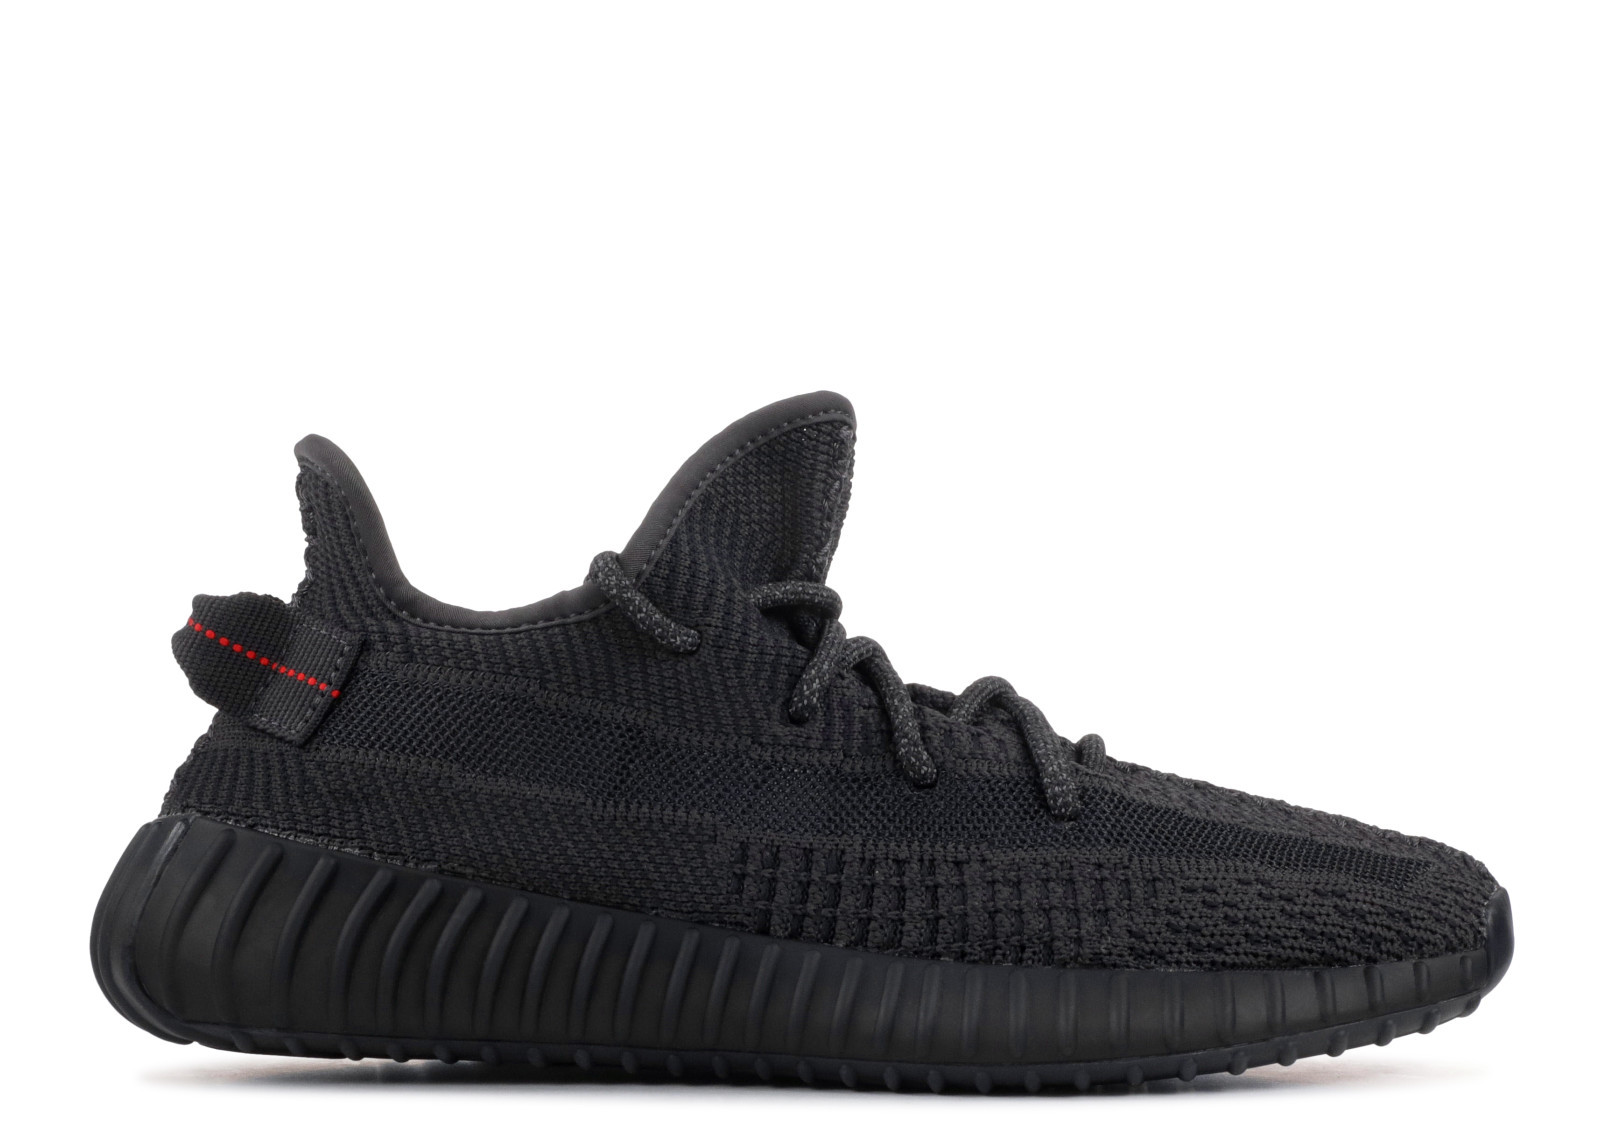 yeezy 350 black non reflective release date